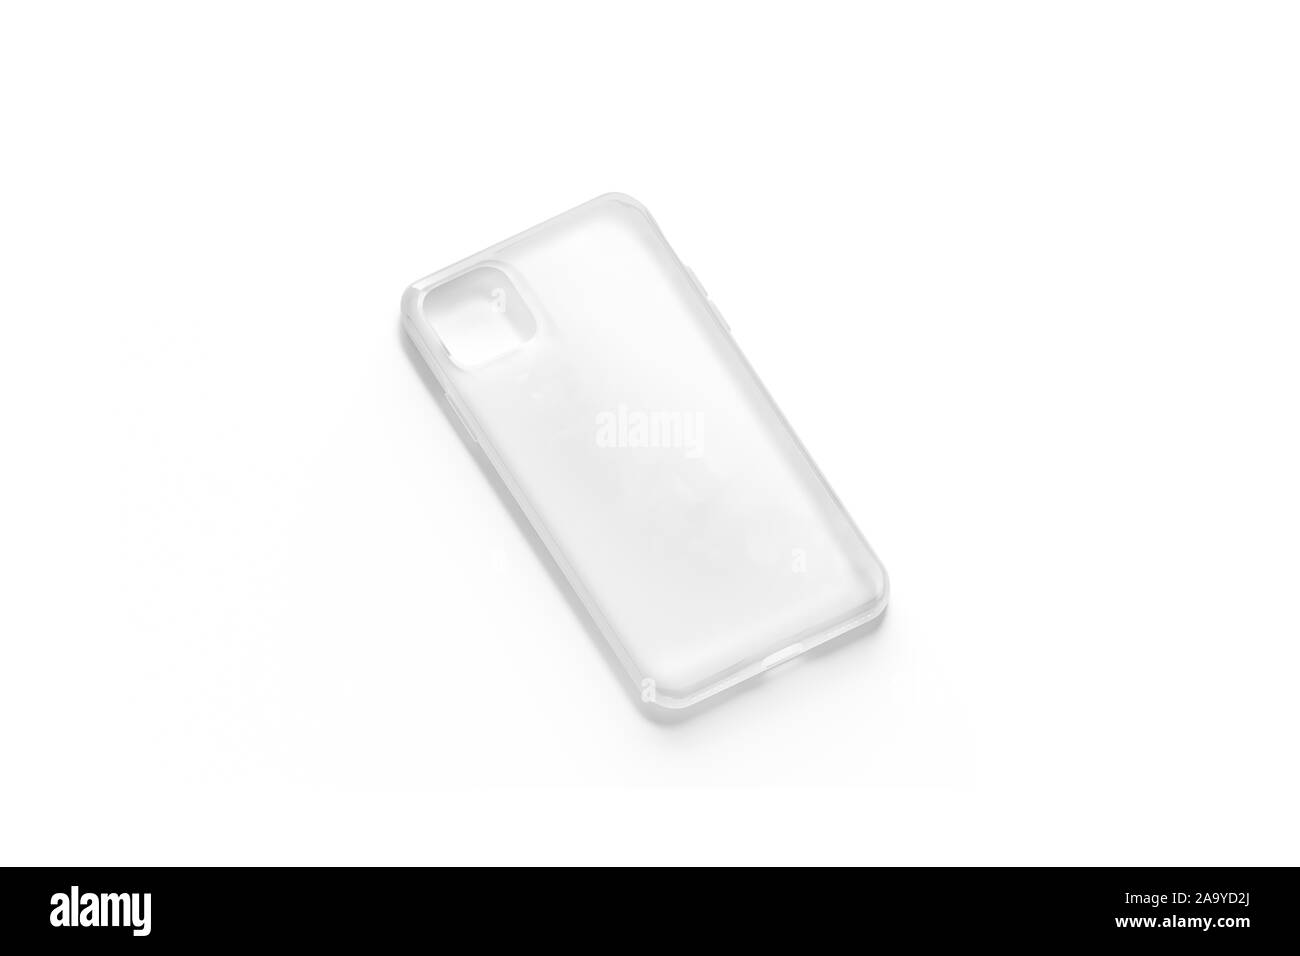 Blank transparent phone case mockup lying, side view Stock Photo